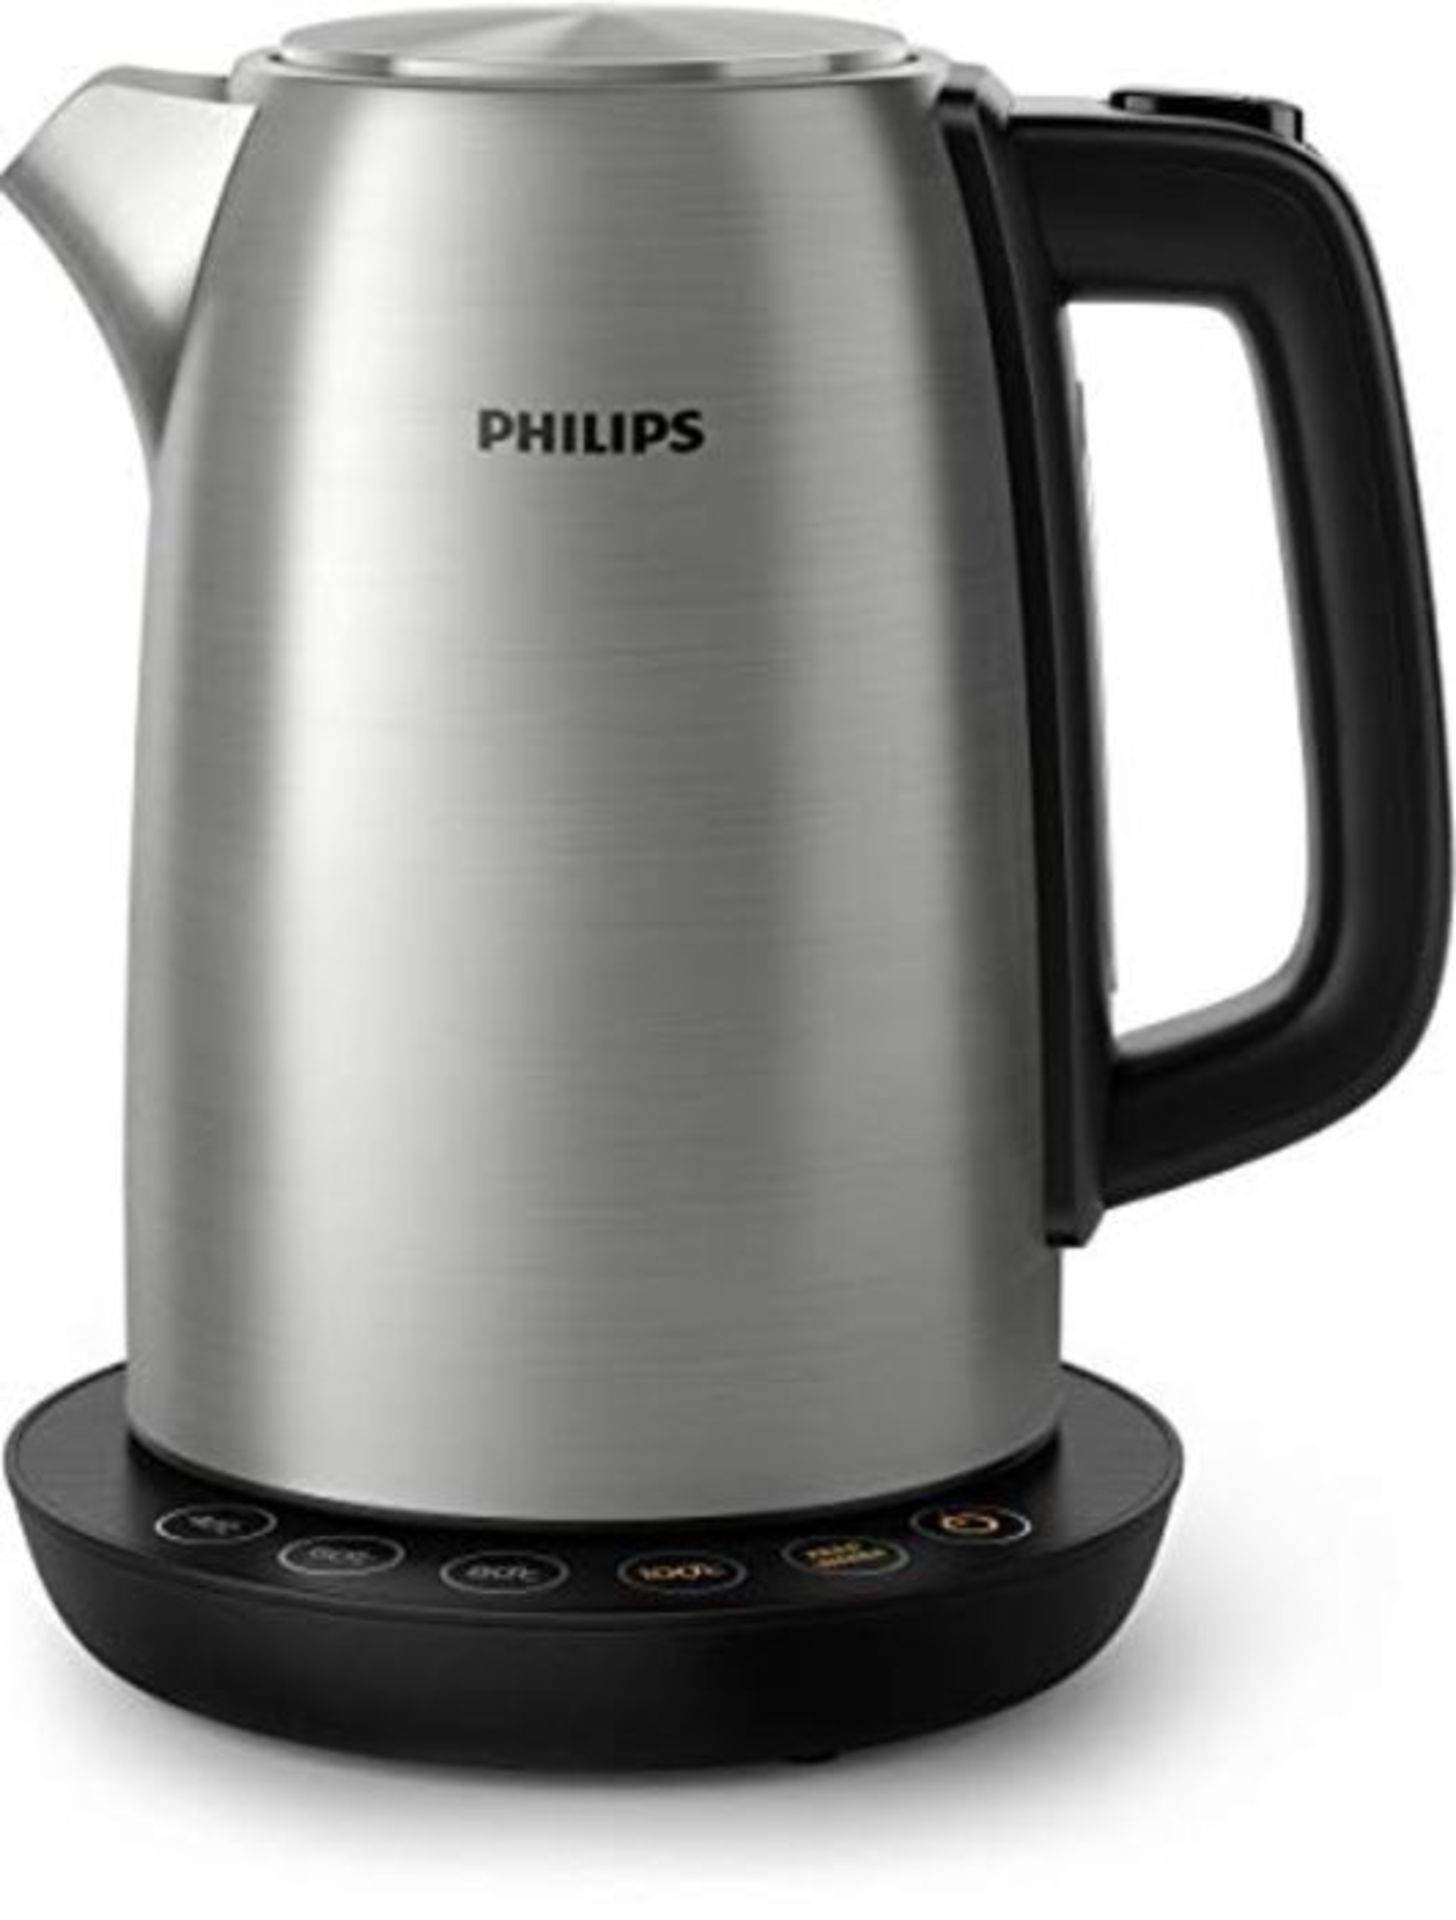 RRP £68.00 Philips Avance Collection HD9359/90 electric kettle 1.7 L Black,Metallic 2200 W Avance